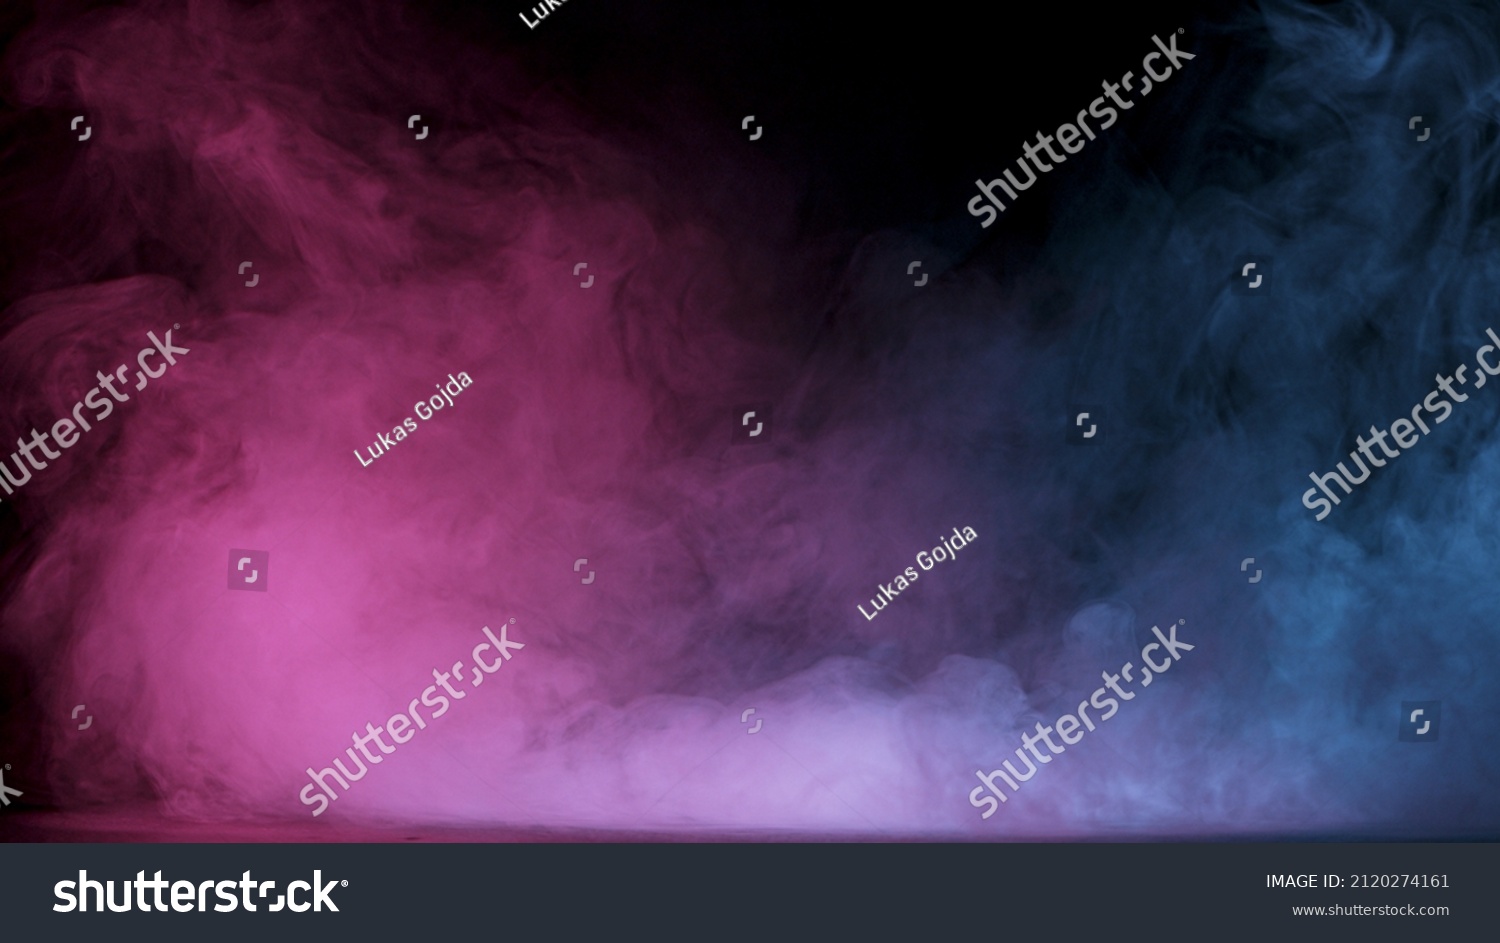 Atmospheric smoke, abstract color background, close-up. #2120274161